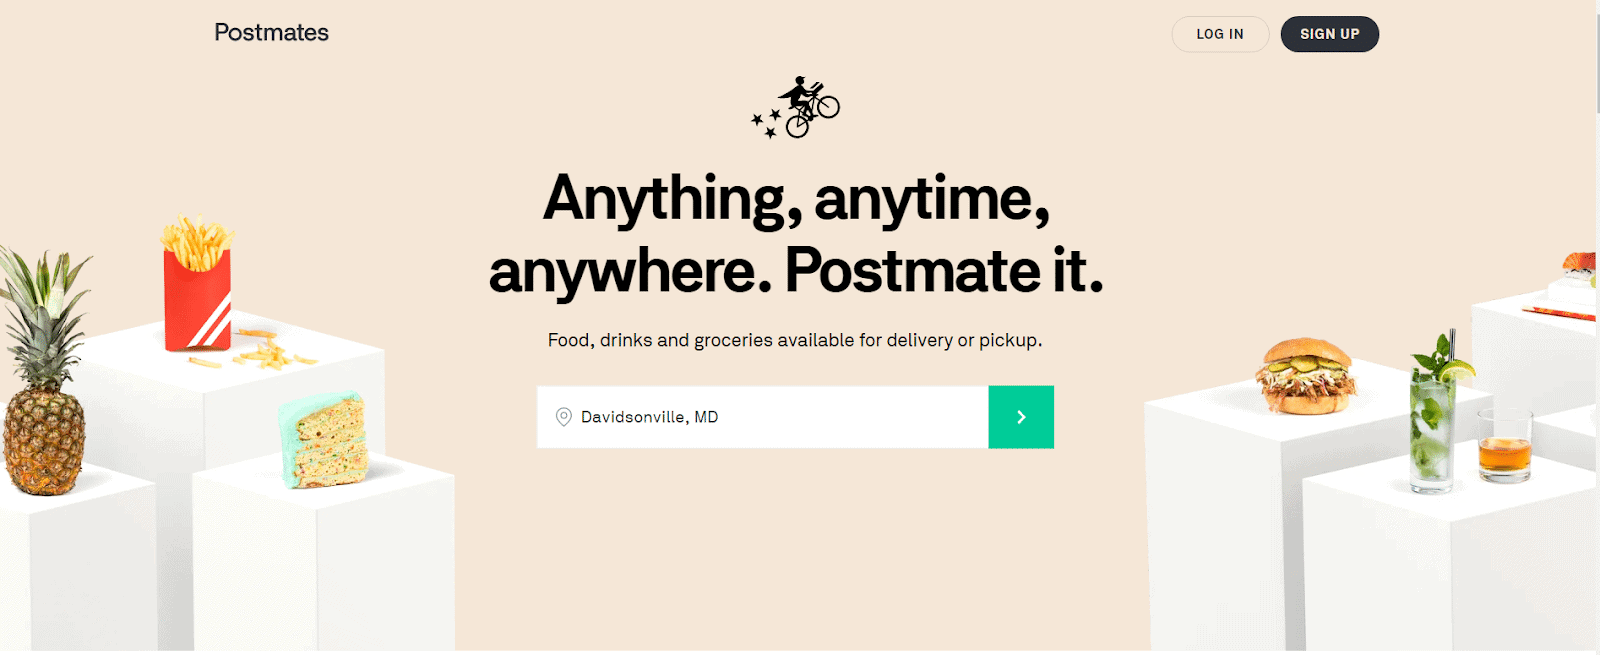 Drive for Postmates: the company's homepage